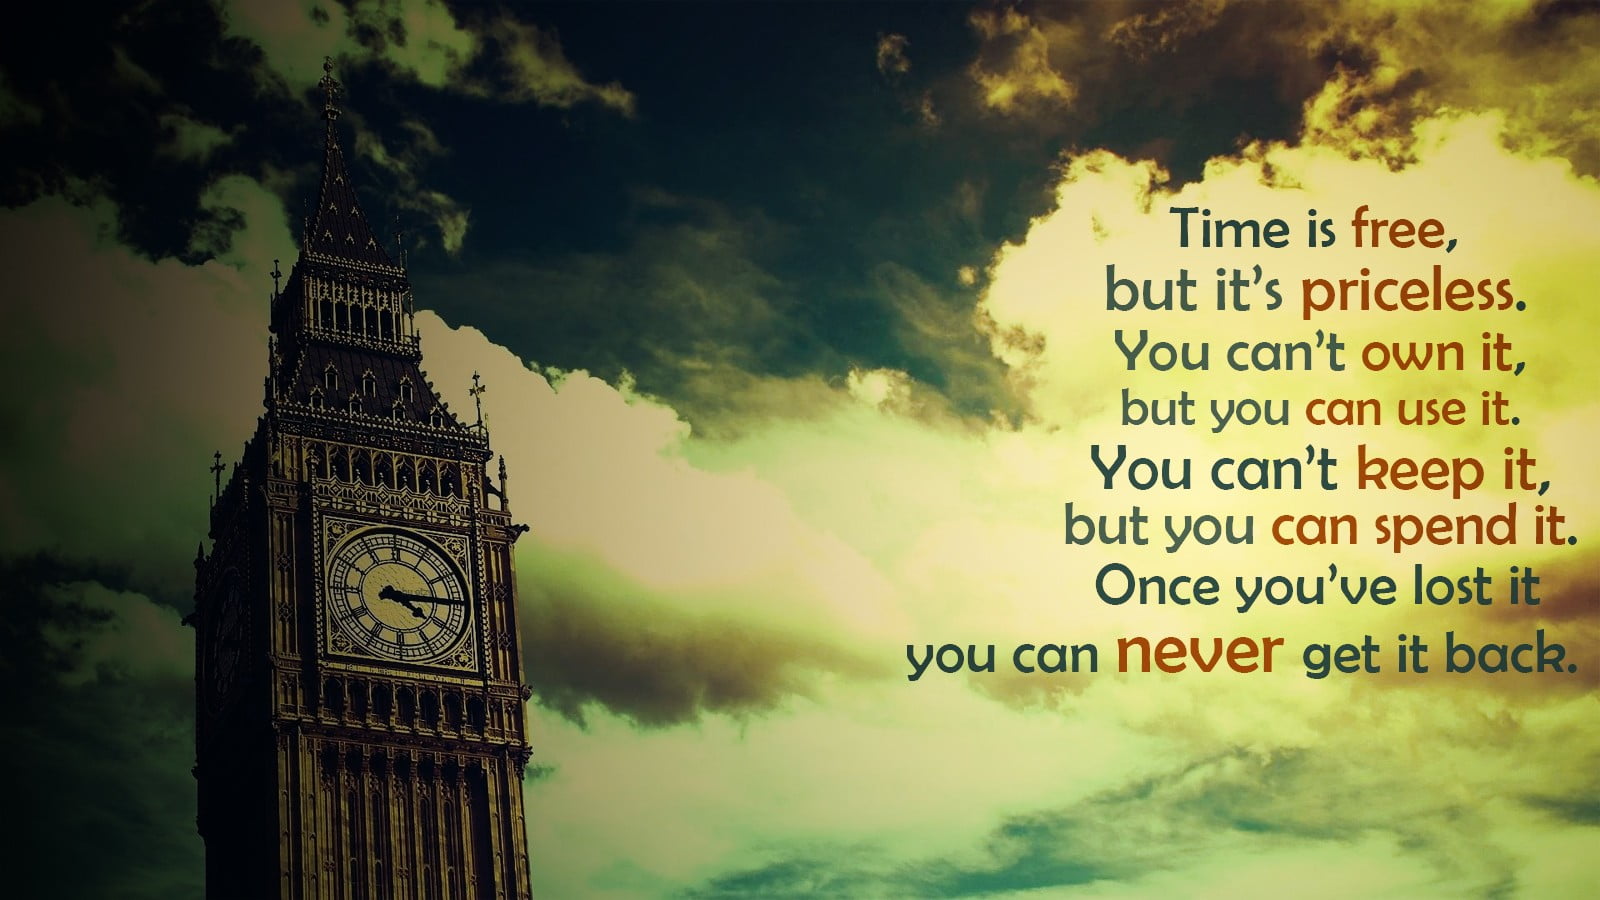 quote, Big Ben, London, time, filter, clouds, inspirational